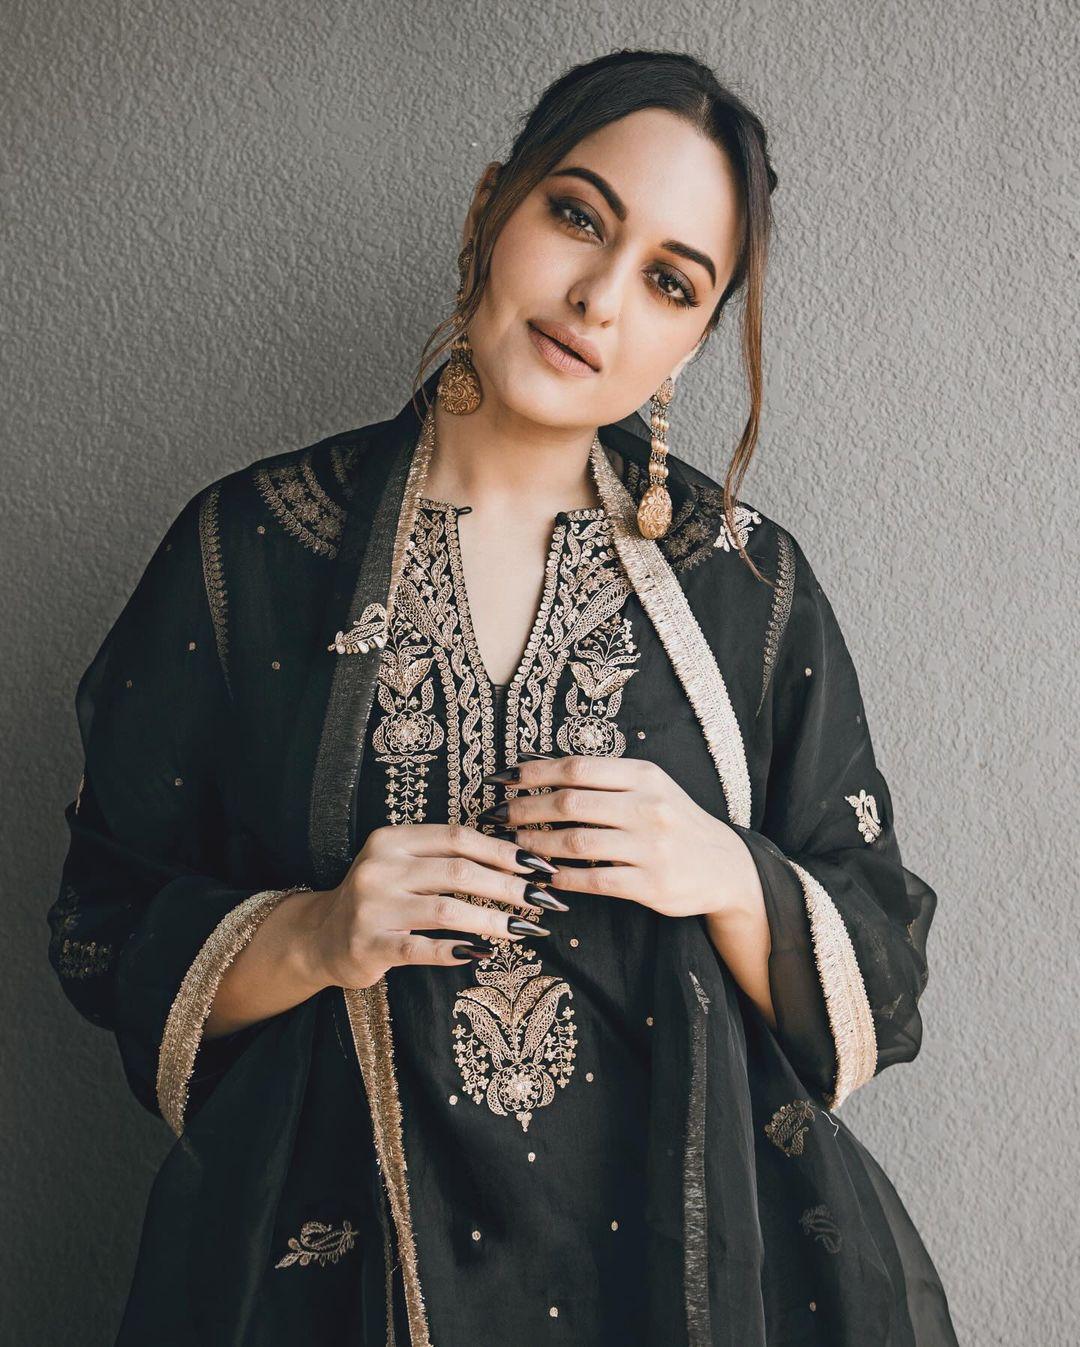 Sonakshi ditched multiple jewellery pieces and wore long golden earrings. A pair of silver juttis and a golden potli bag made her shine like a queen